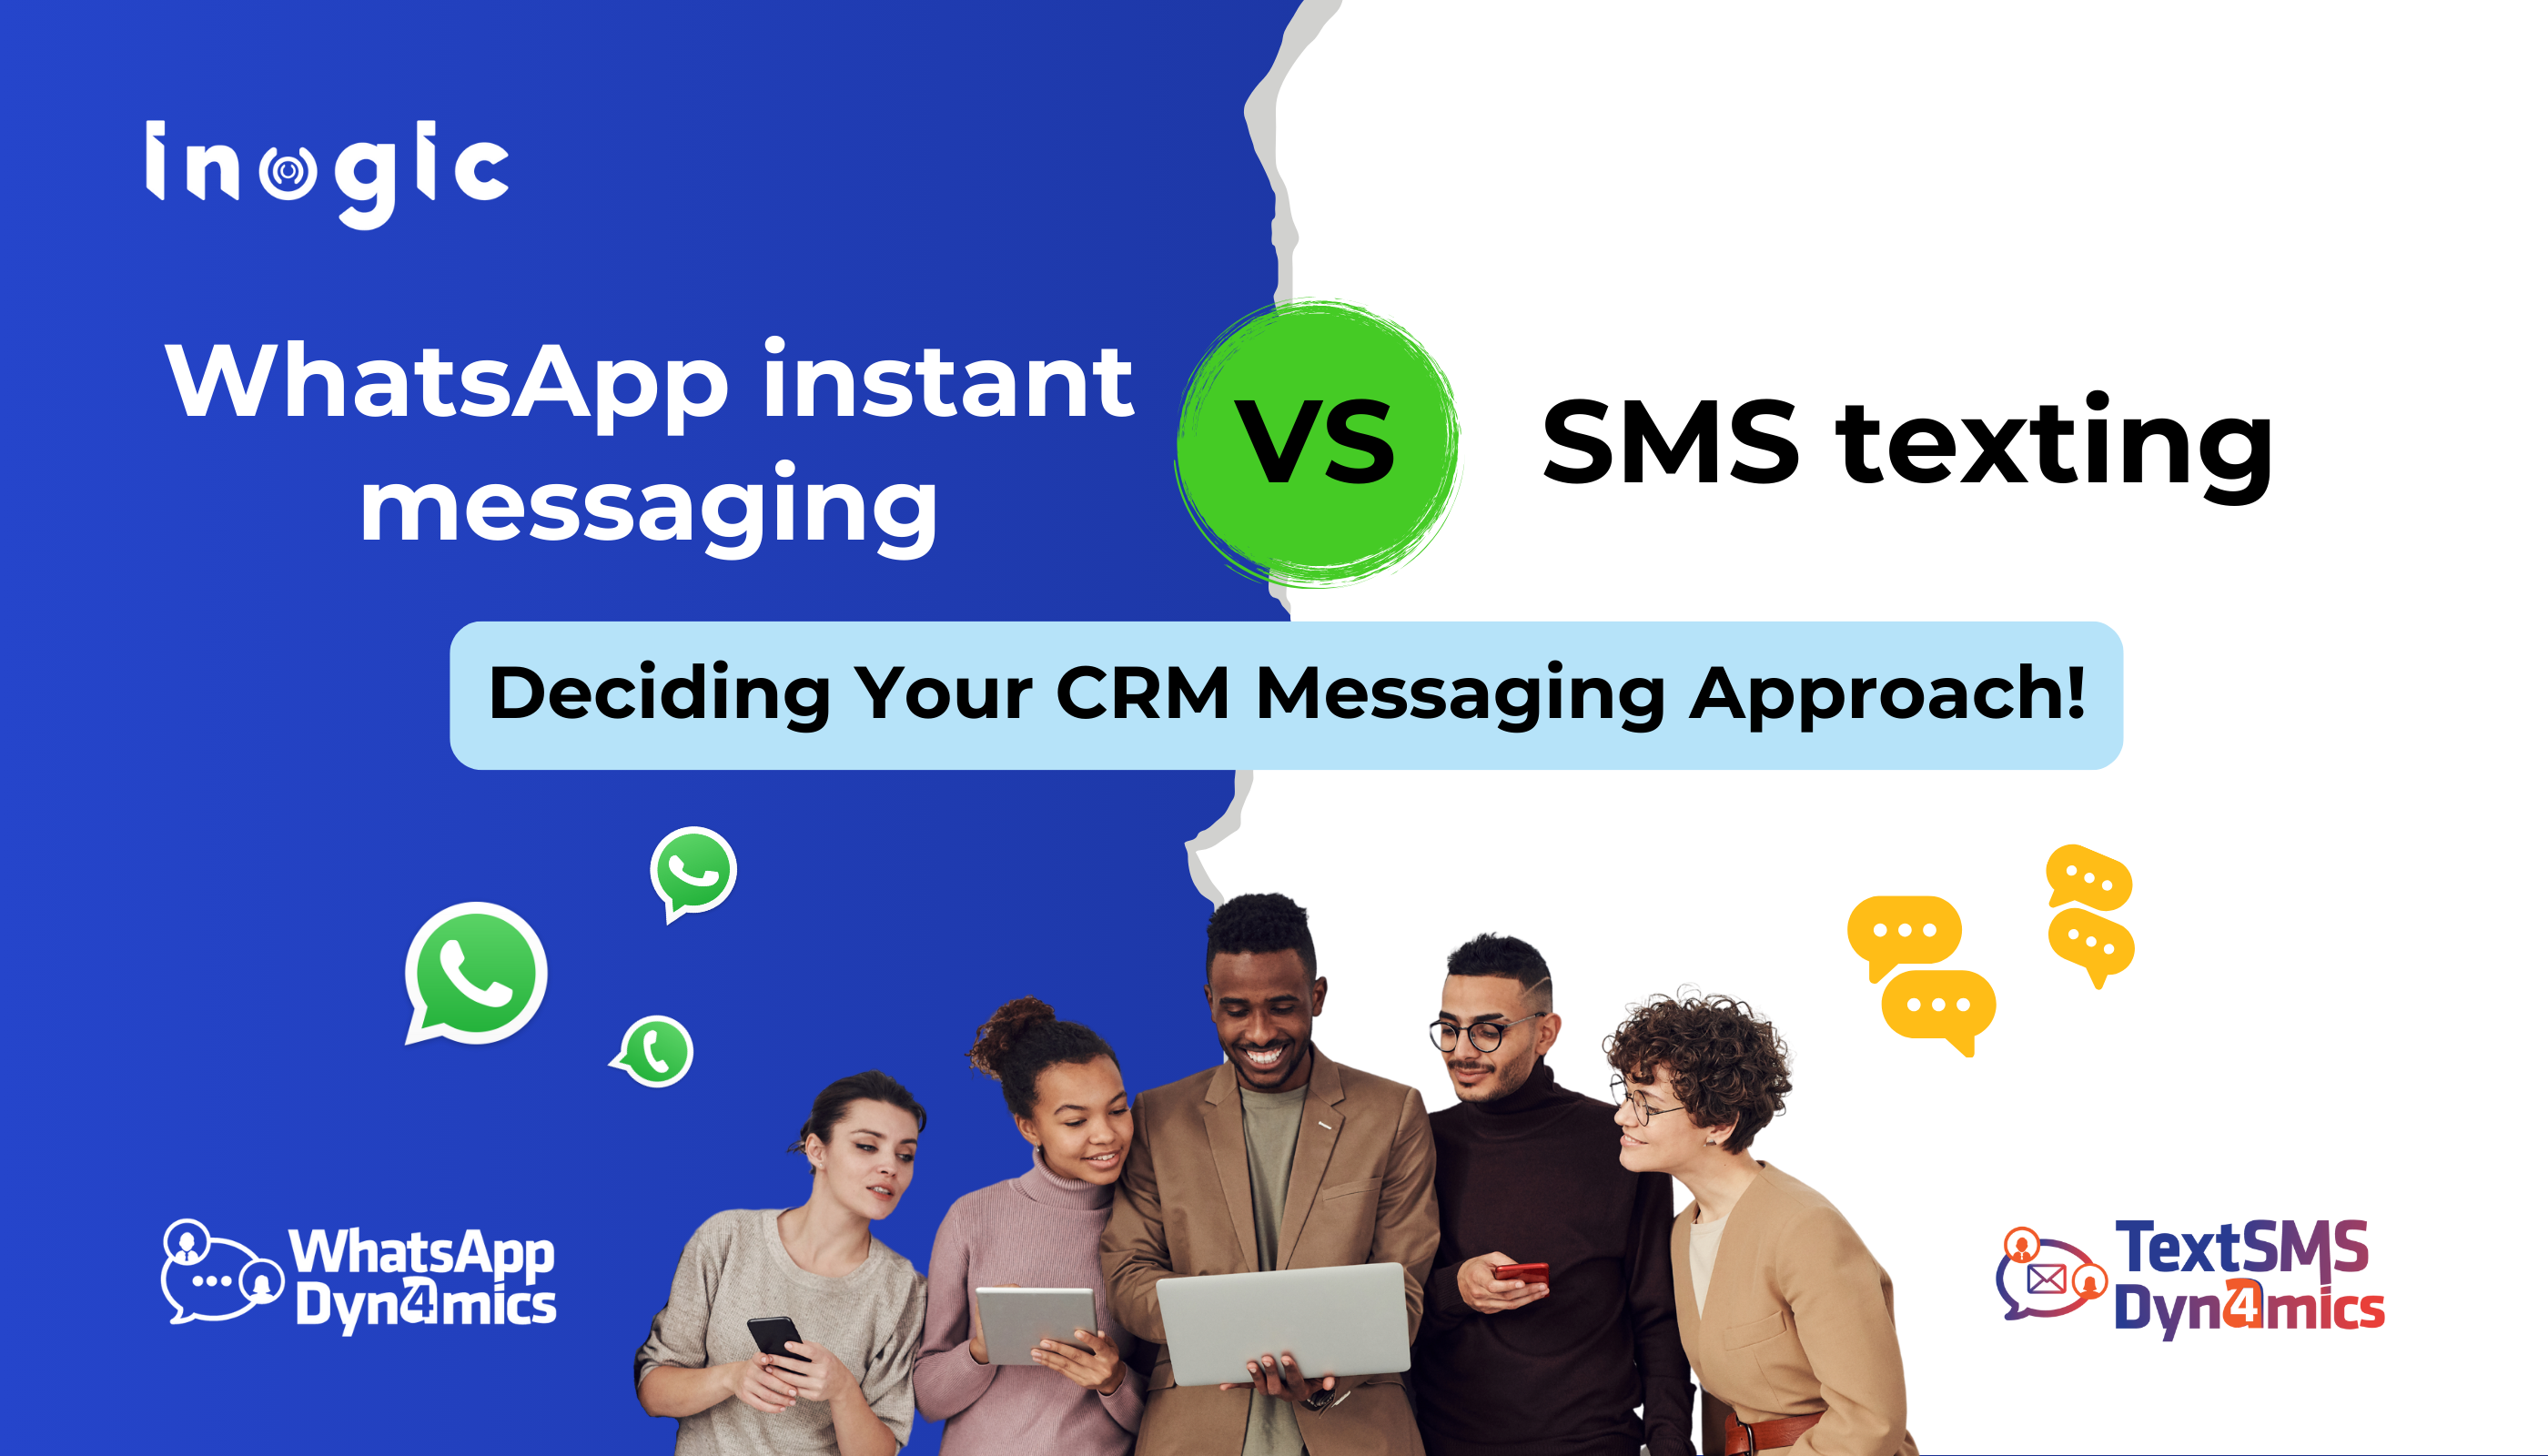 WhatsApp instant messaging vs SMS texting: Deciding Your CRM Messaging Approach!